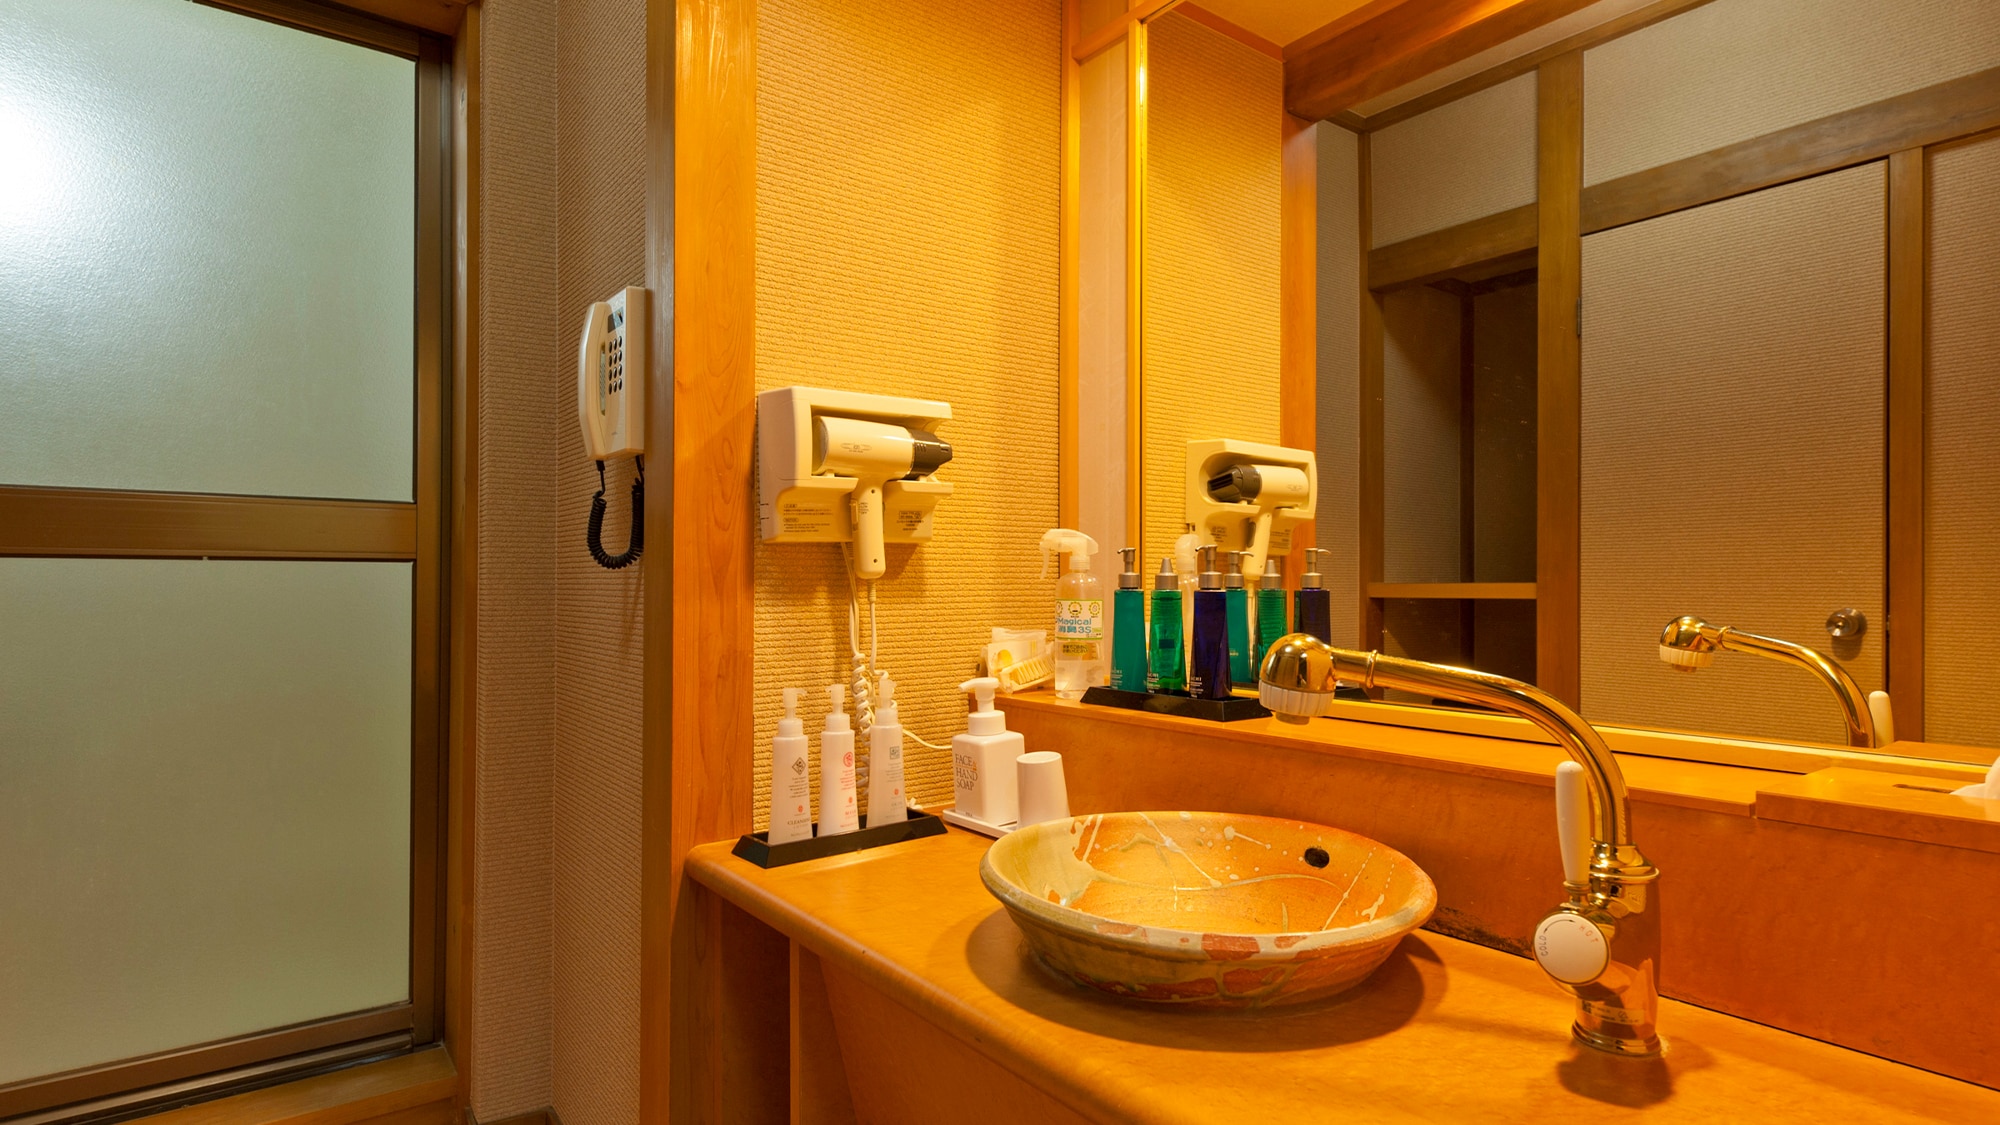 ■Junior suite Japanese-style room｜Each guest room is fully stocked with amenities and cosmetics for women and men